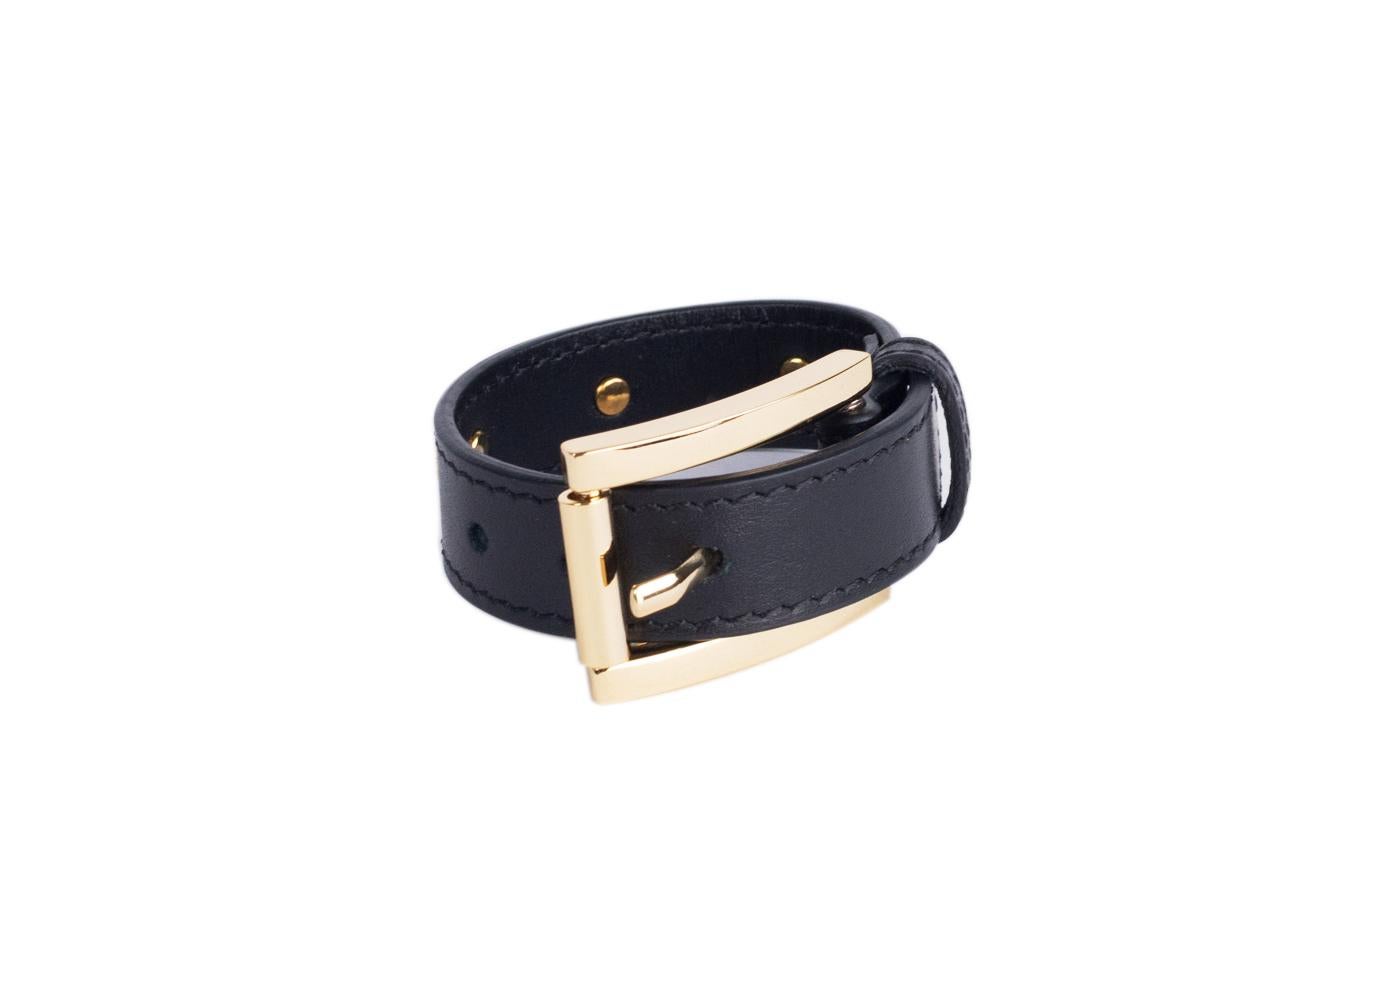 Every man will to buckle down with confidence when it comes to Versus Versace. This modern unit features a three gold lion head appliques, and adjustable leather belt strap, and interior gold stamped logo. You can tastefully strap into luxury and